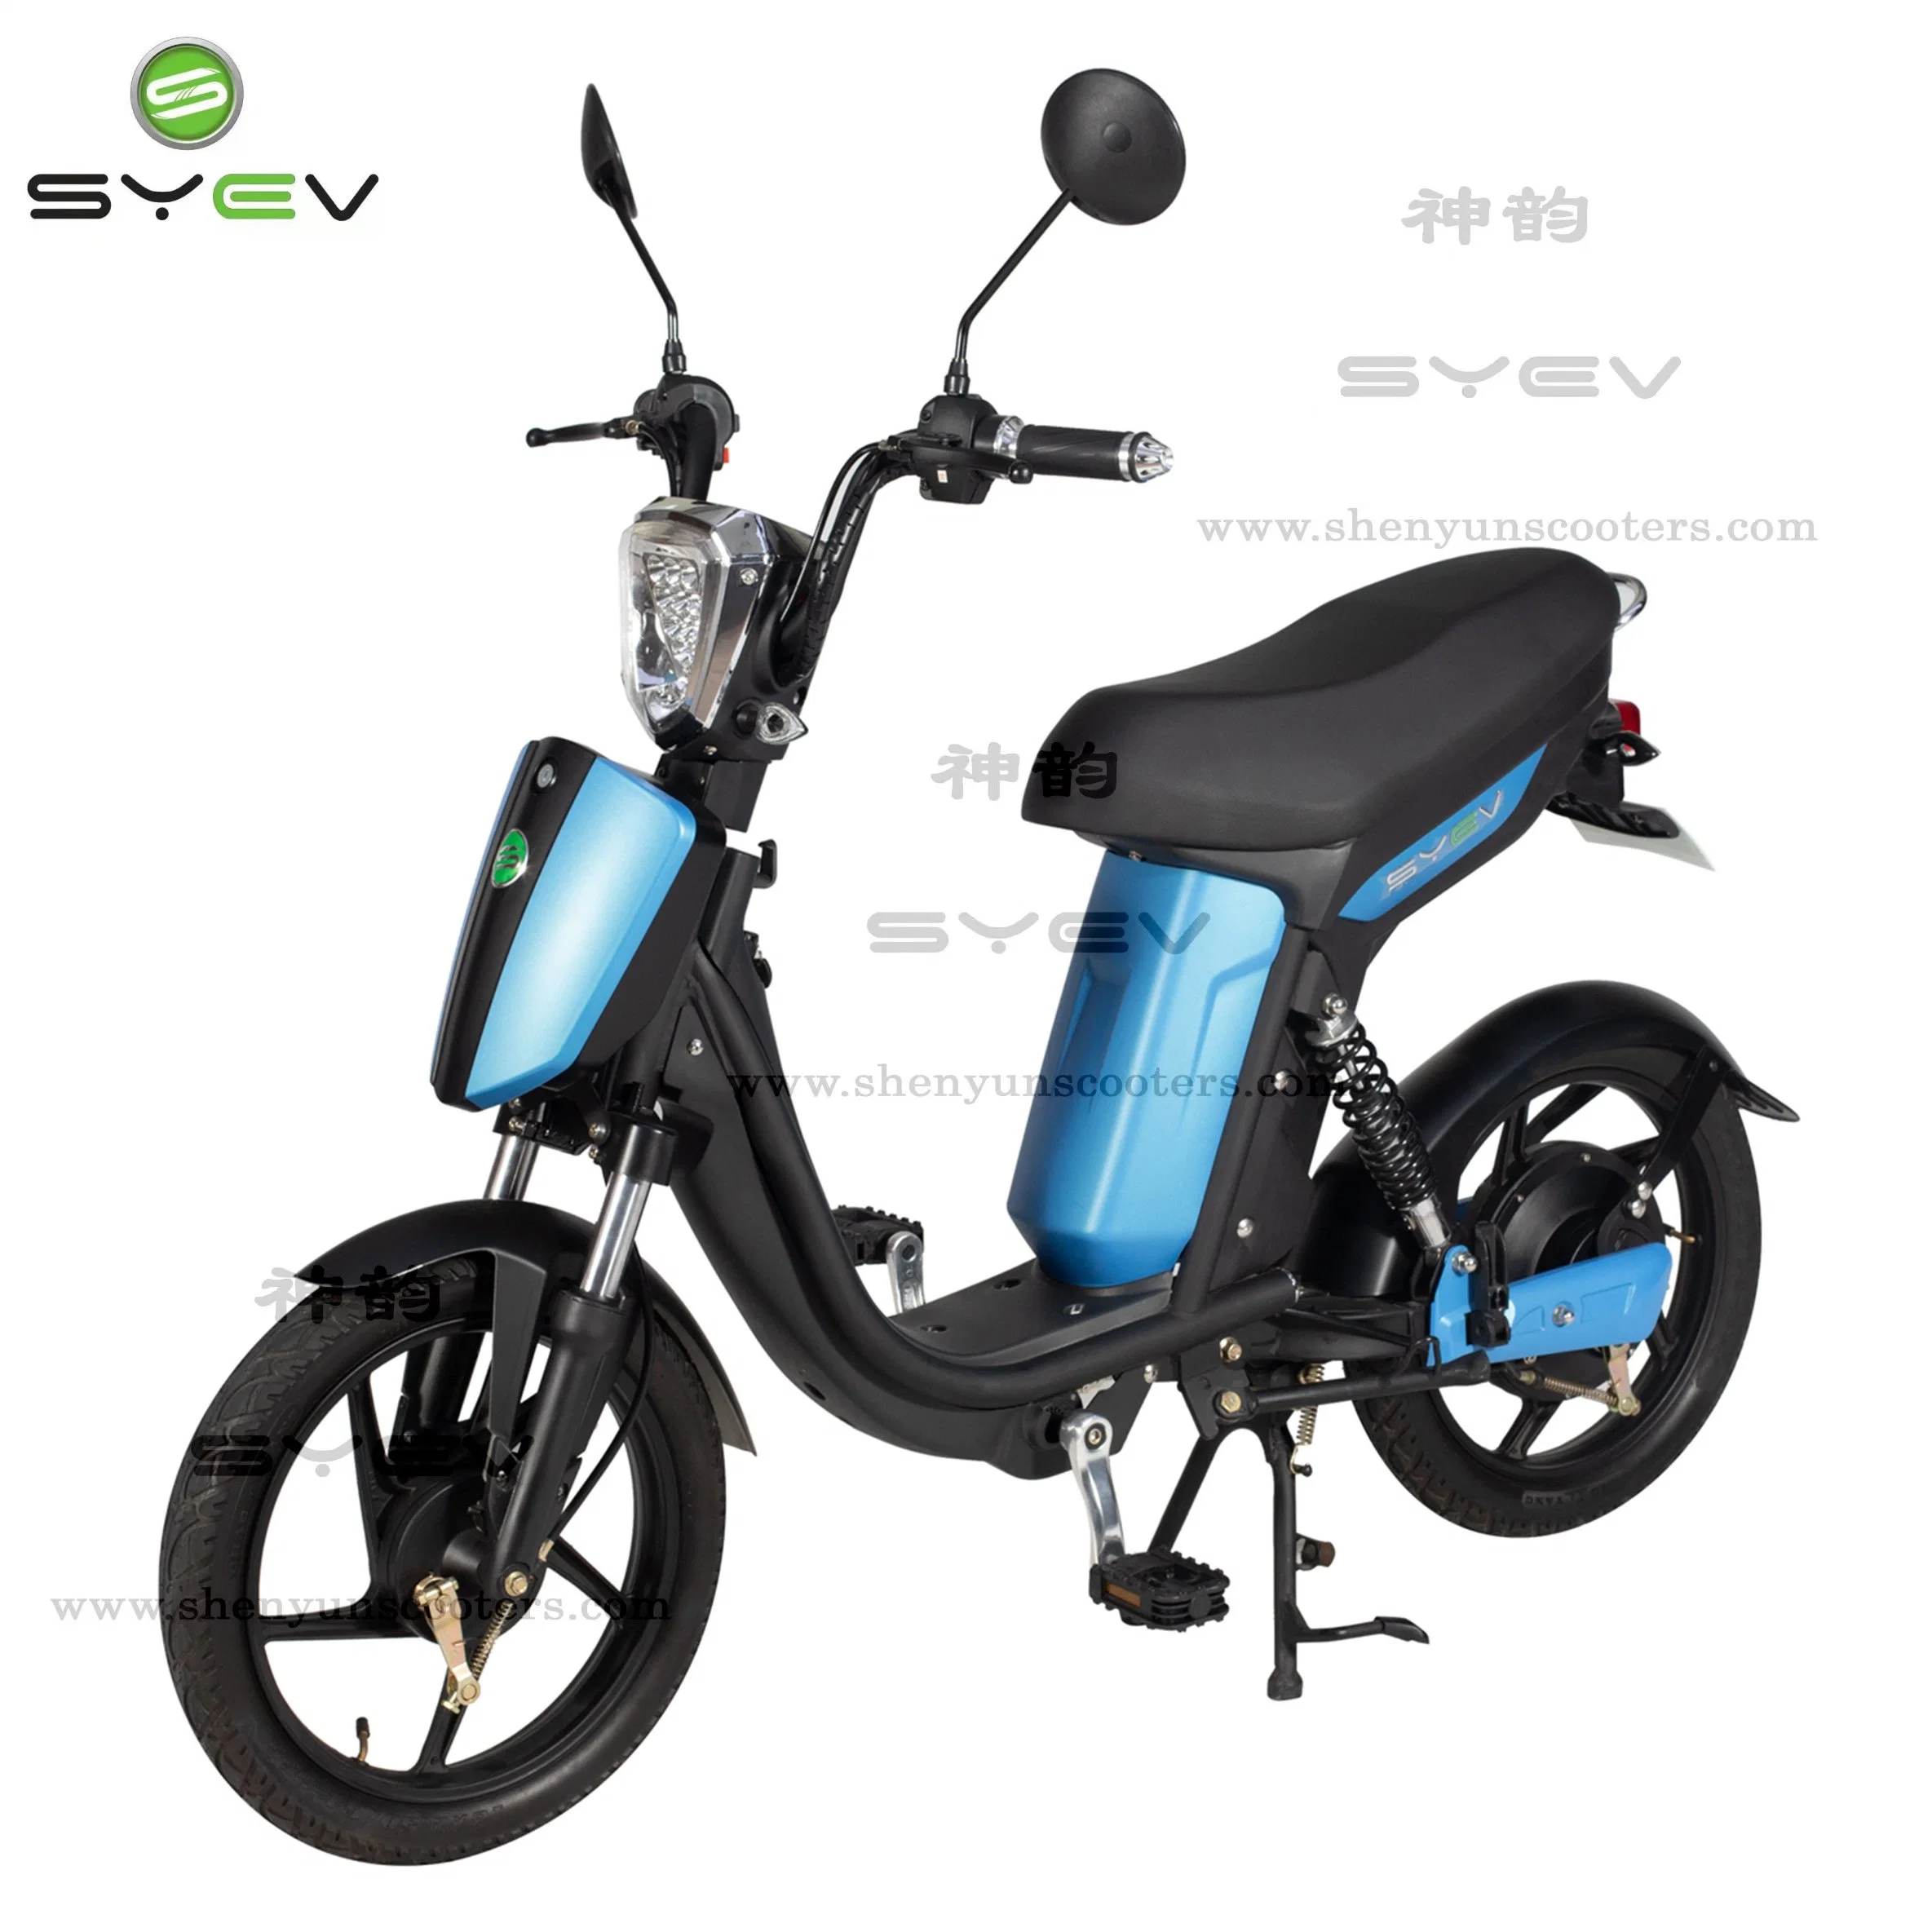 12ah 350W Big Power Adults Electric E-Bike Mobility Scooter with Lithium Battery